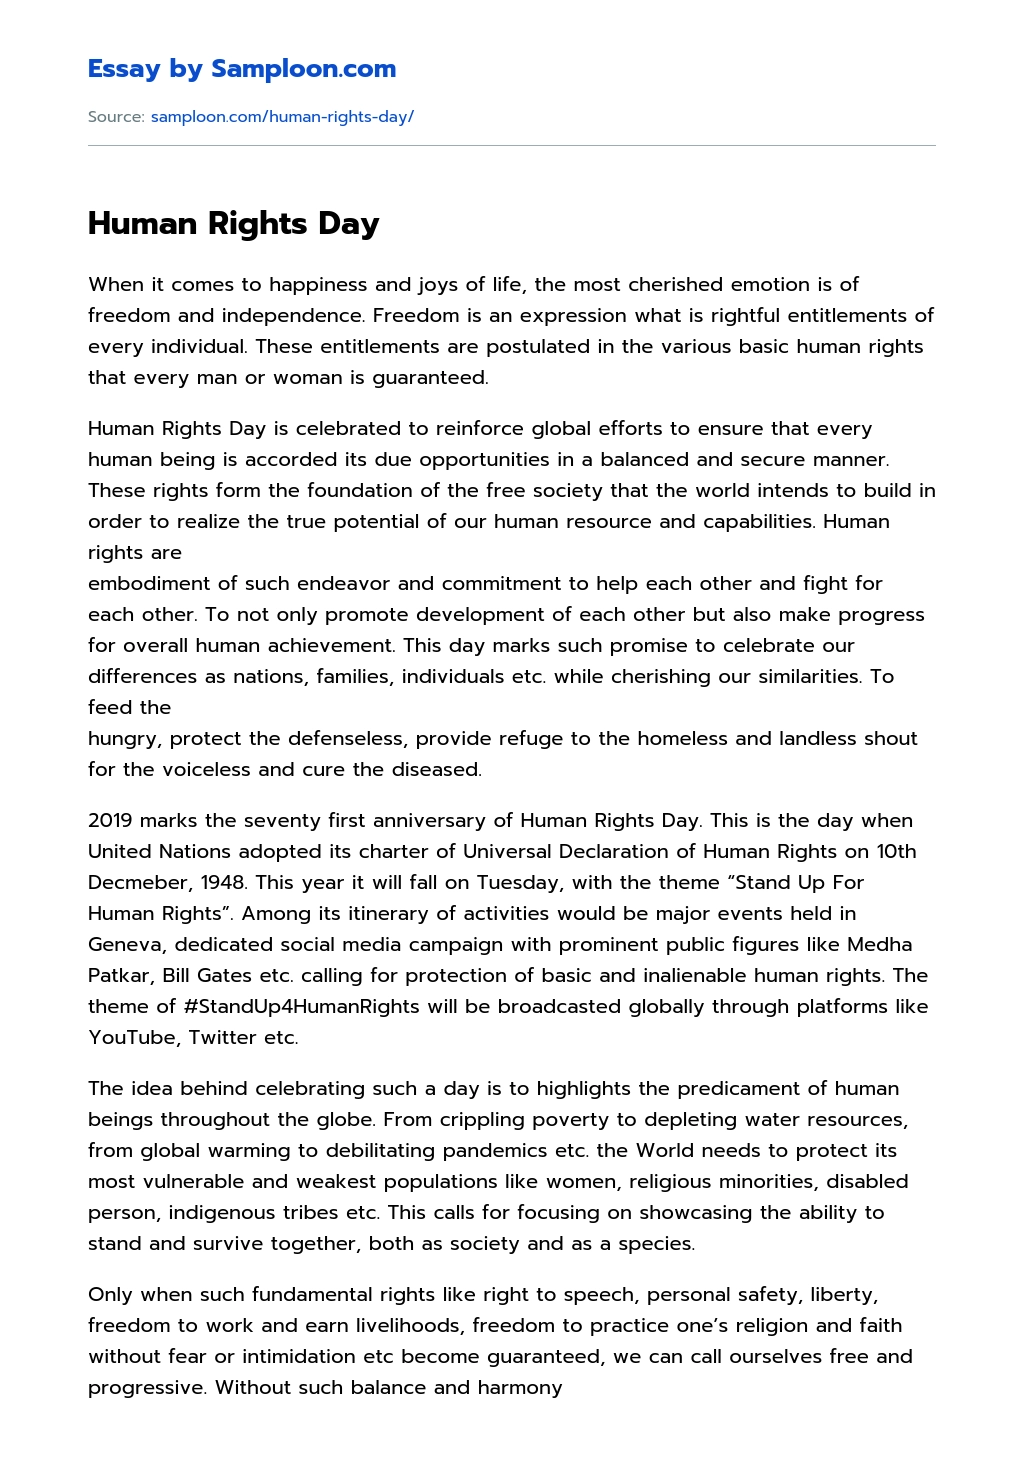 Human Rights Day essay